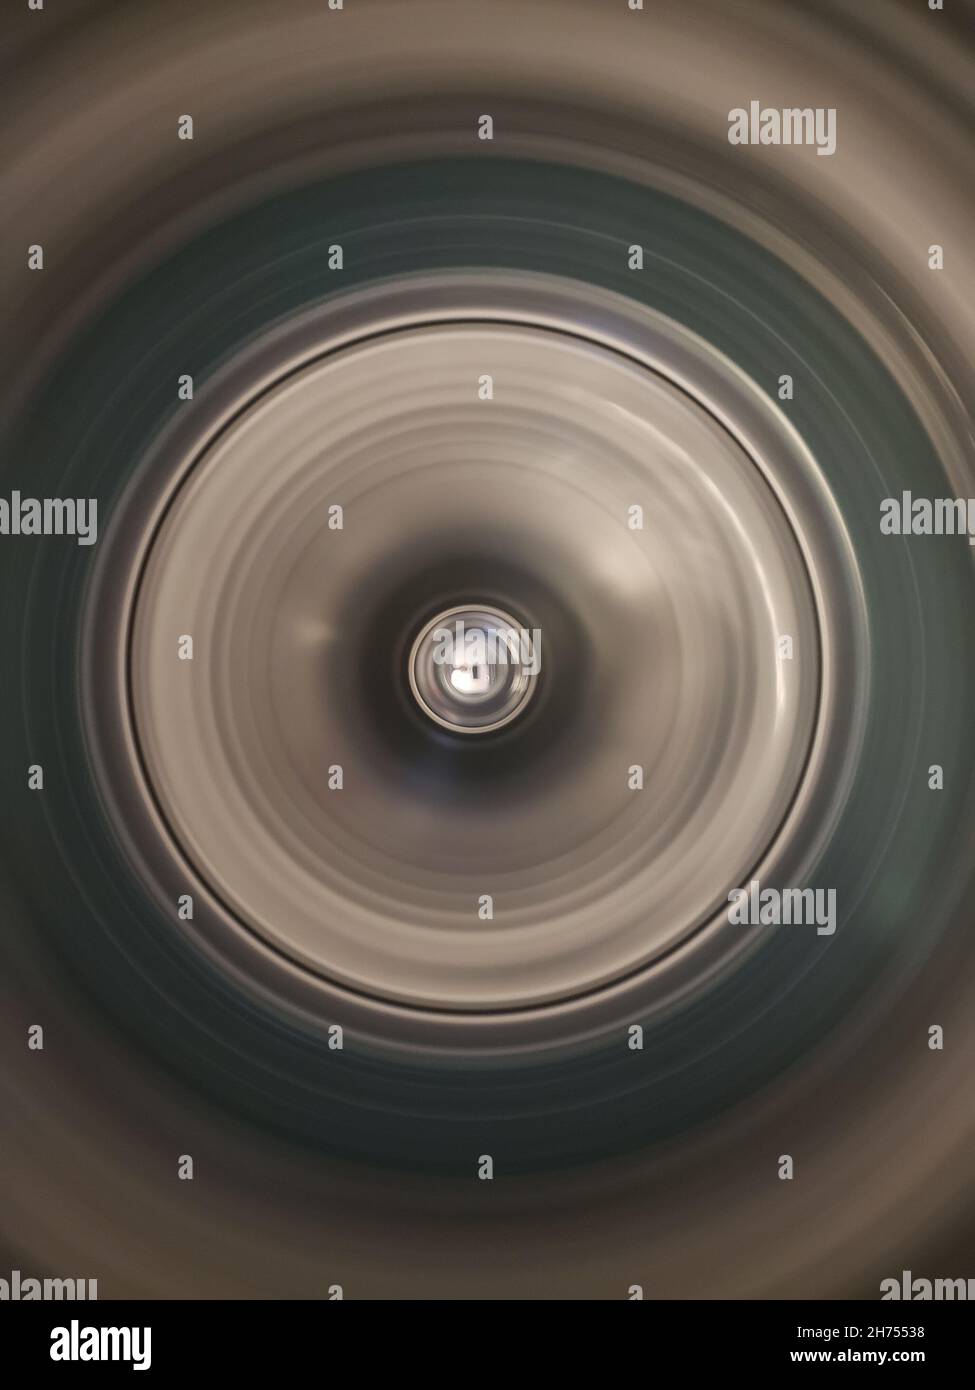 Looking into the Tub of a Washing Machine on Spin Cycle Stock Photo